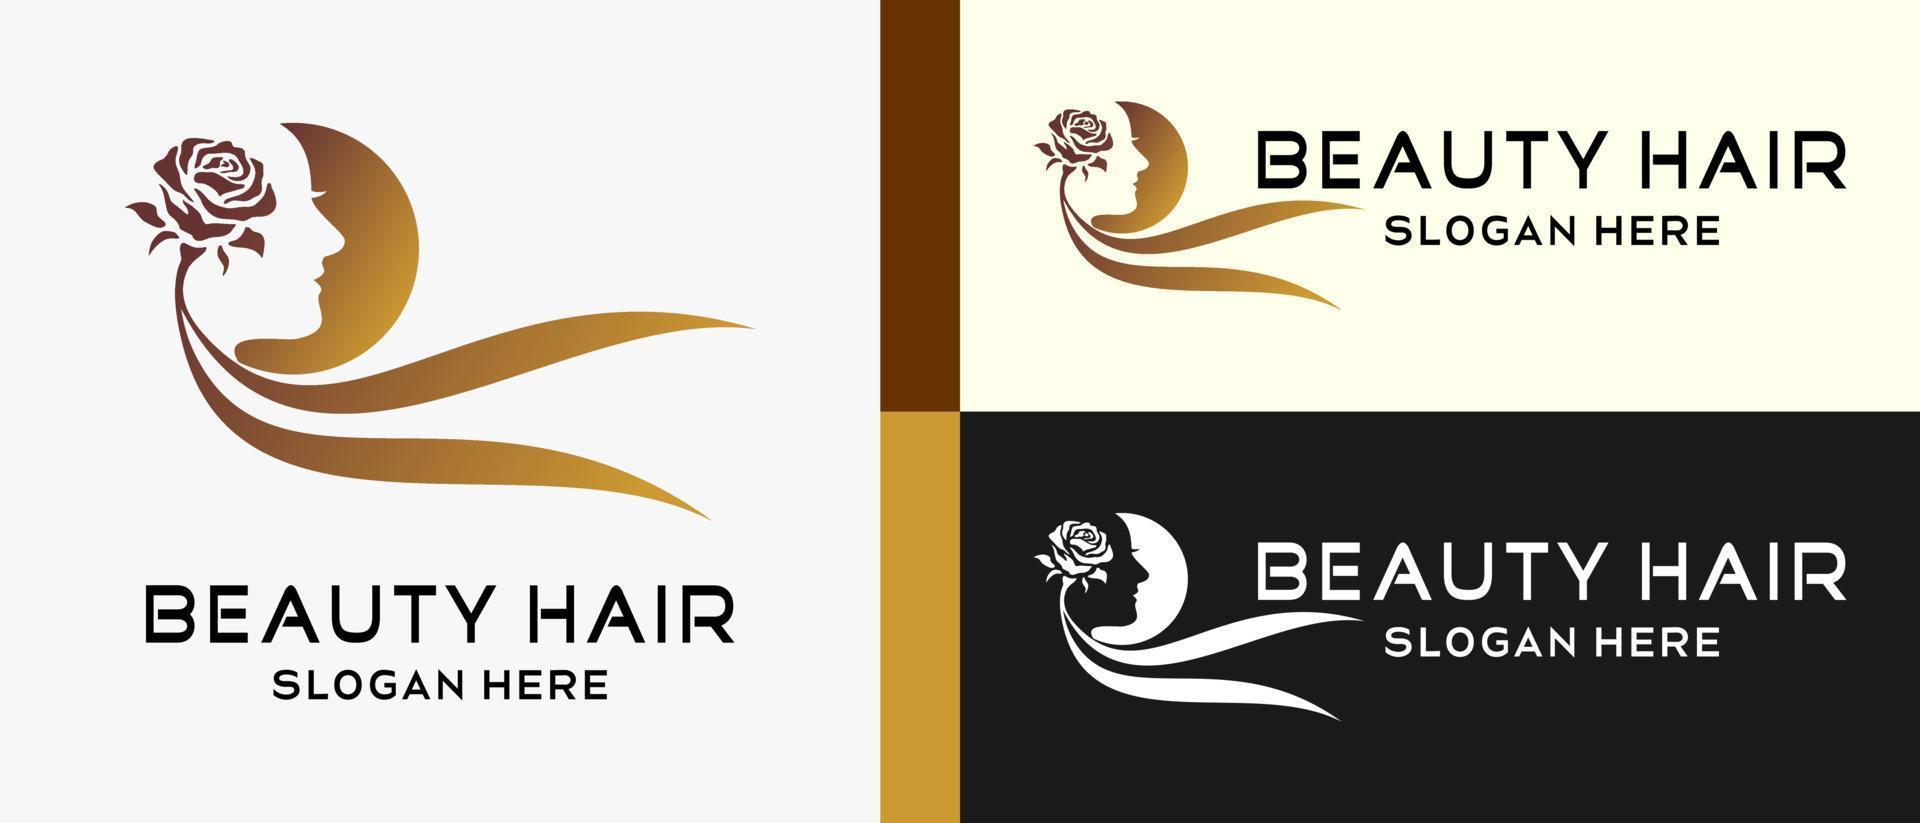 beauty logo design template with woman face, rose flower and hair with creative element concept. beauty hair logo illustration, hair care and salon, premium vector